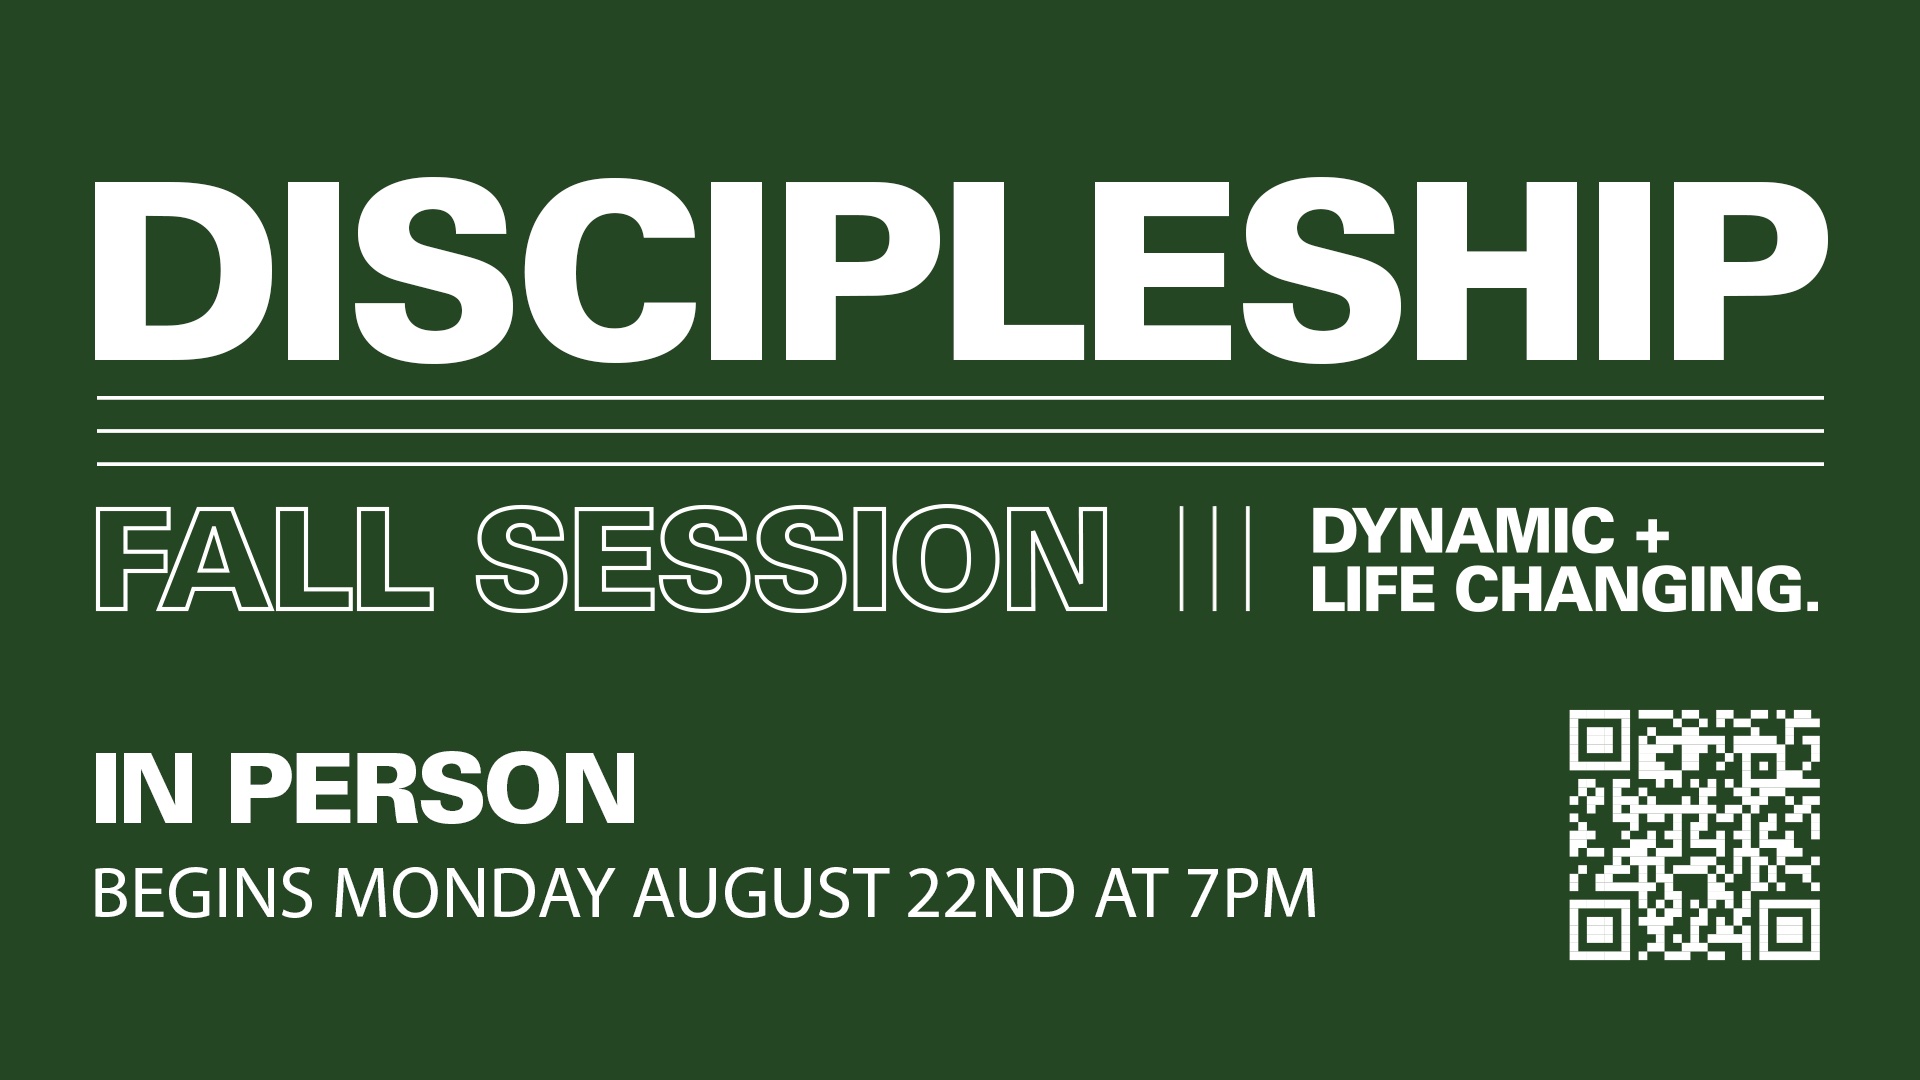 School of Discipleship - Fall Session at the Gwinnett campus